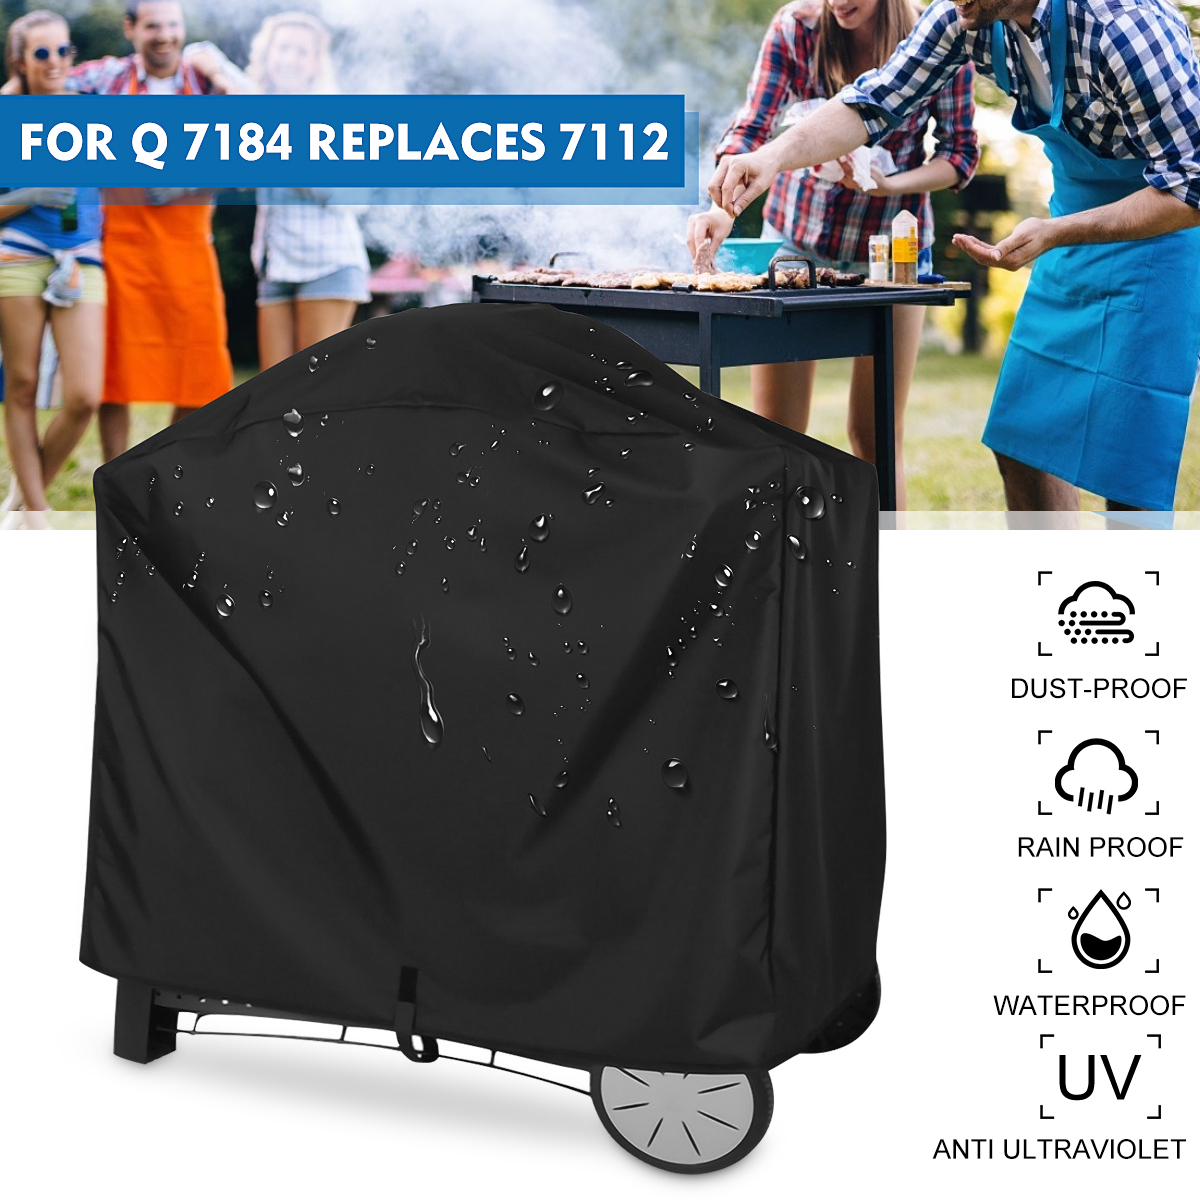 1422x558x1016-cm-BBQ-Grill-Cover-Waterproof-Anti-dust-Gas-Charcoal-Barbecue-Protector-Outdoor-Campin-1711679-1